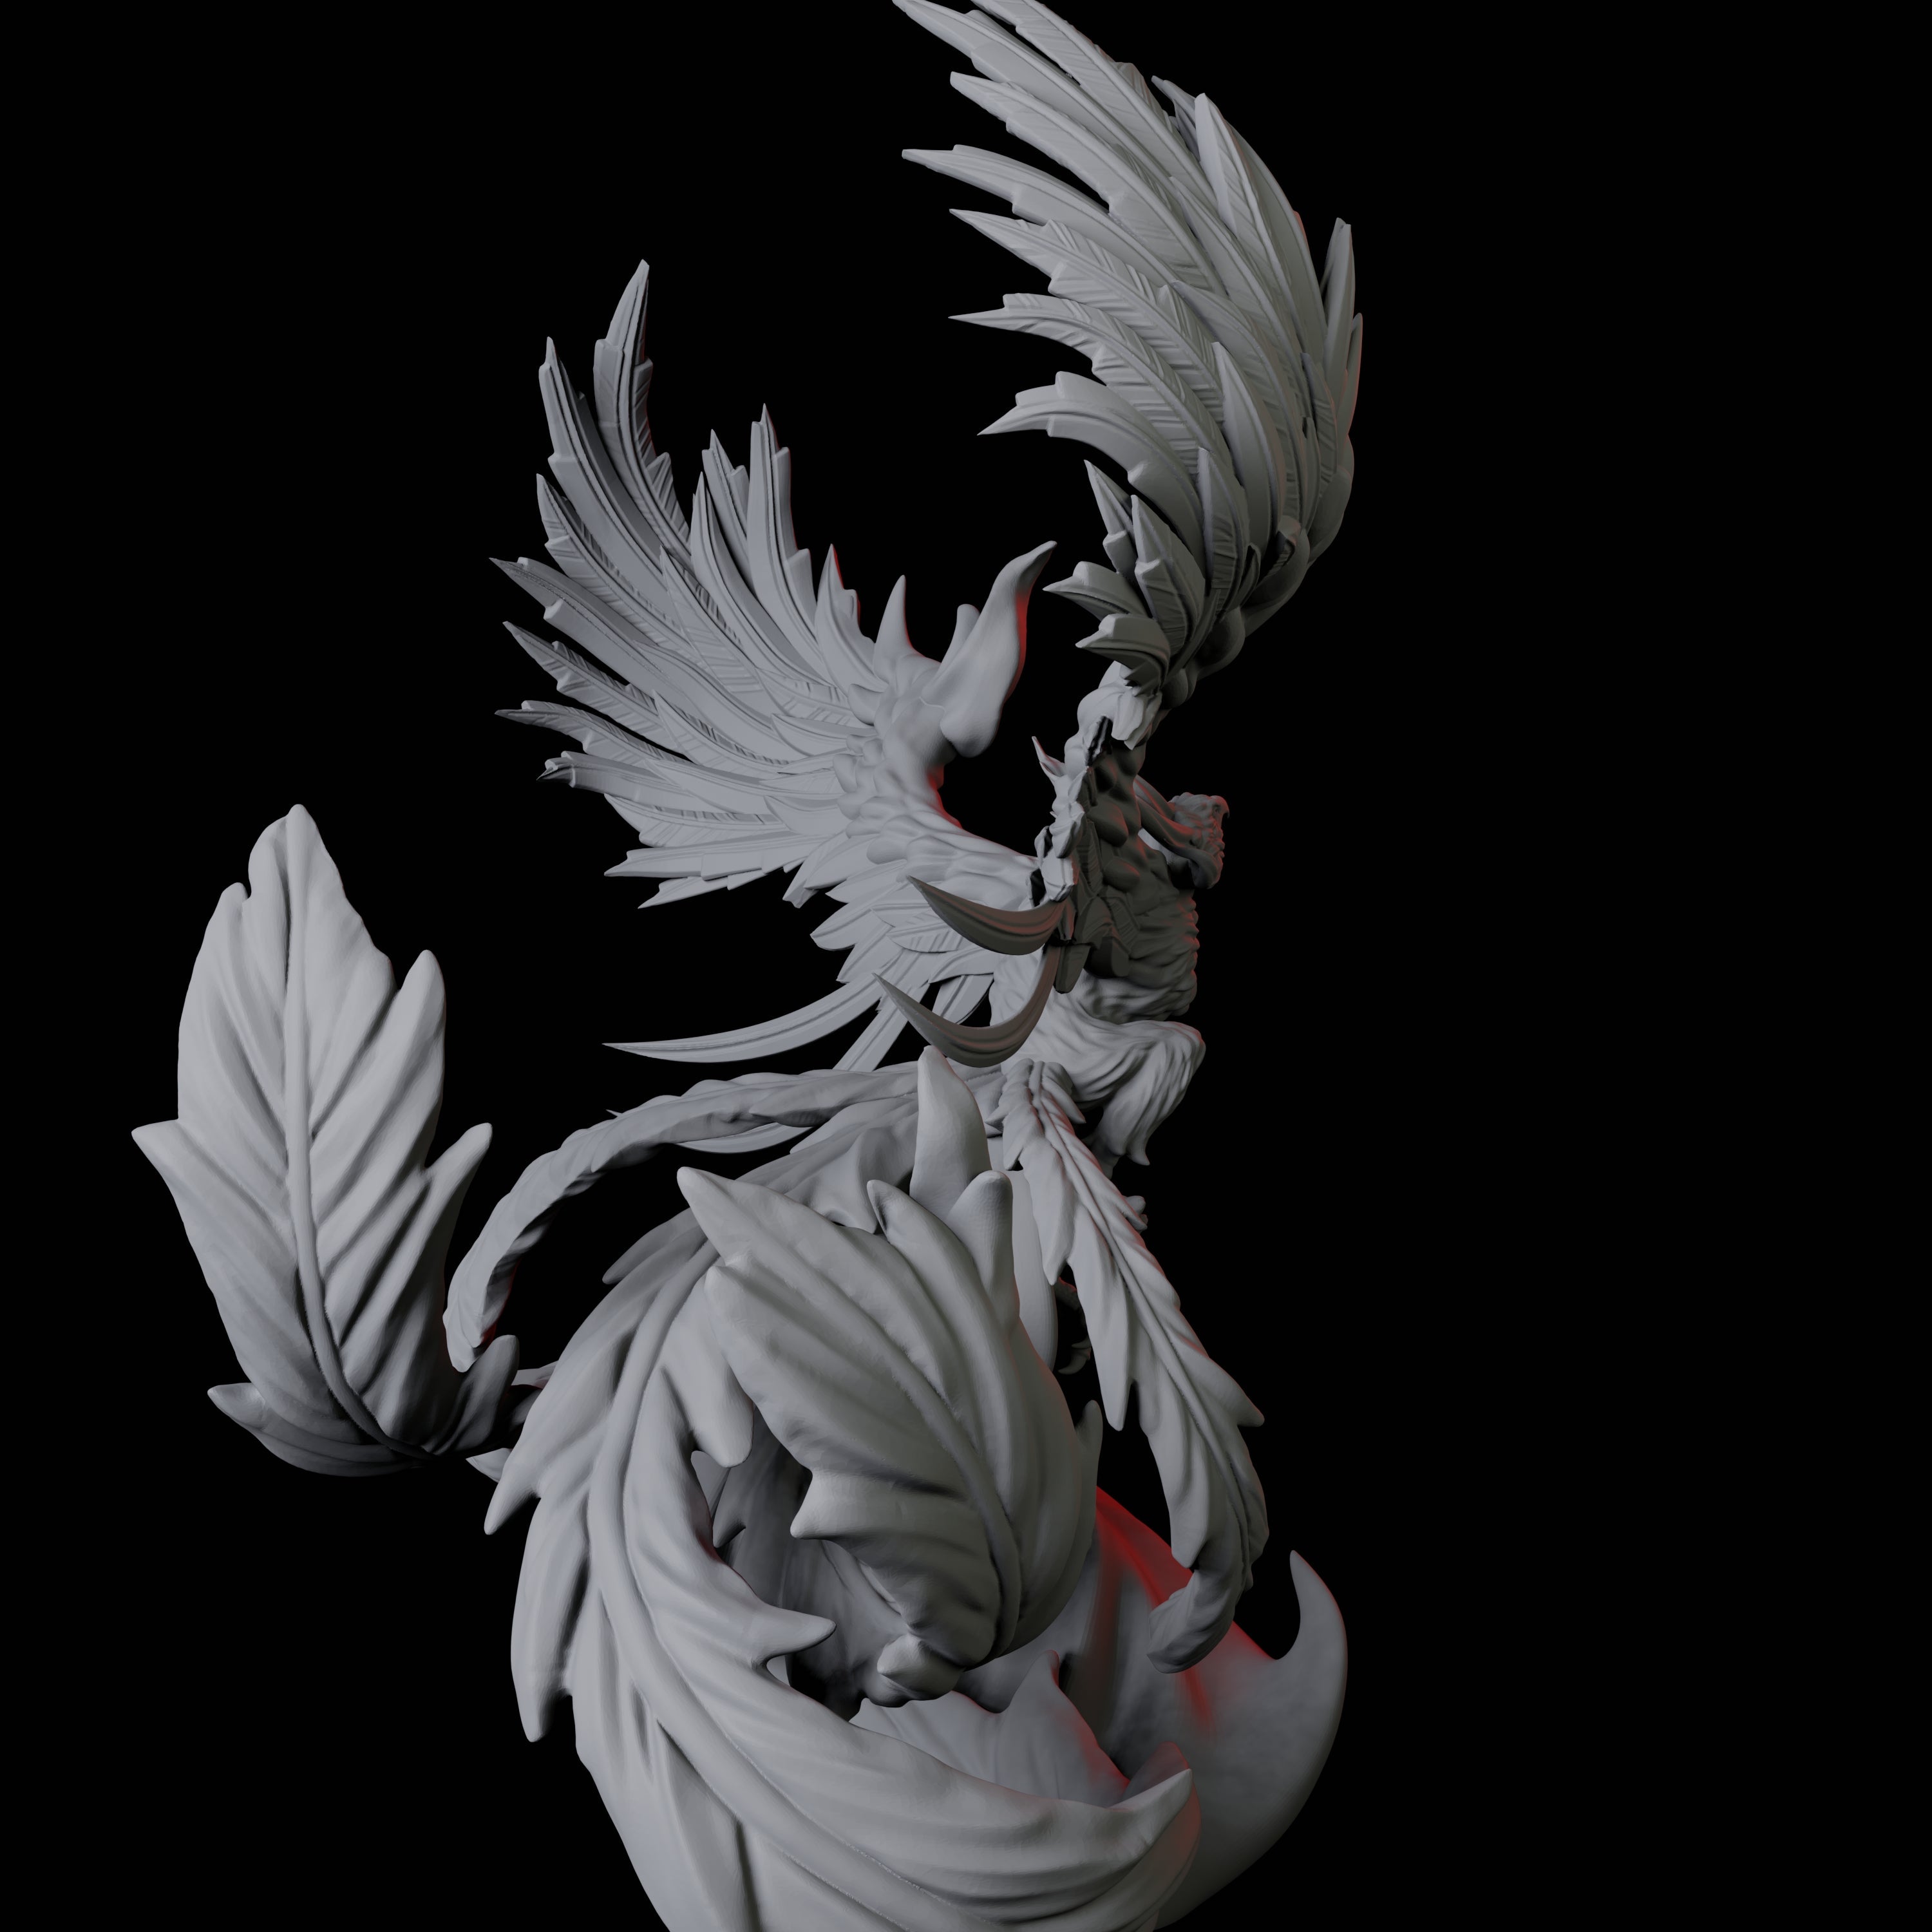 Majestic Blazing Phoenix Miniature for Dungeons and Dragons, Pathfinder or other TTRPGs